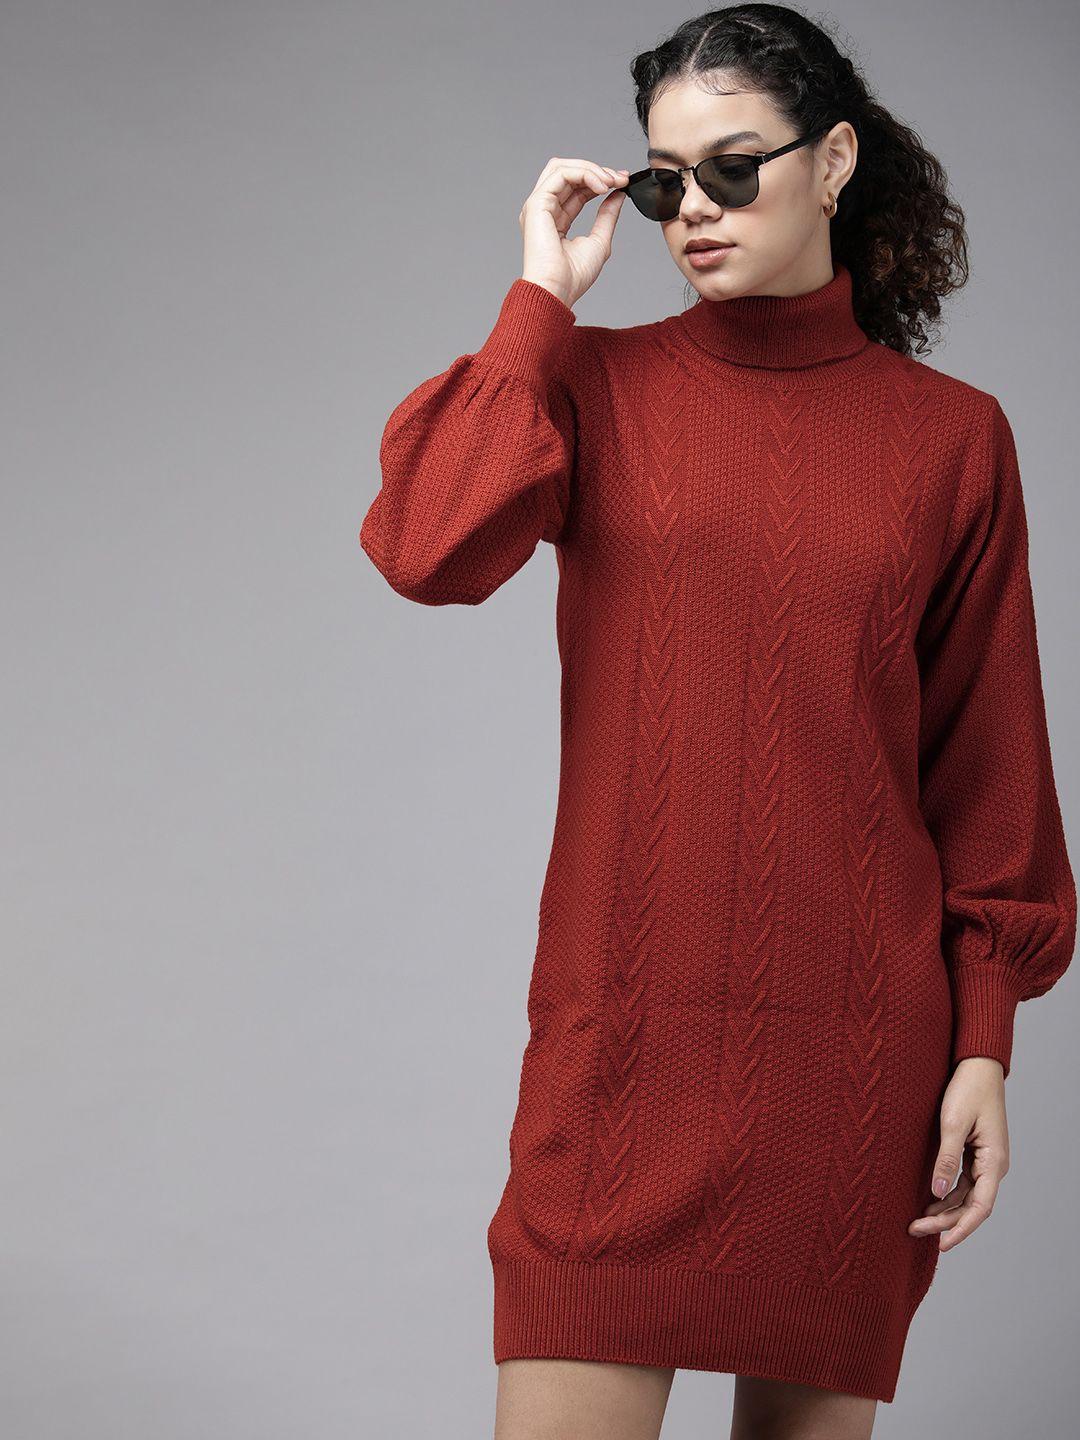 the roadster life co. women rust red self-design striped open-knit bodycon sweater dress